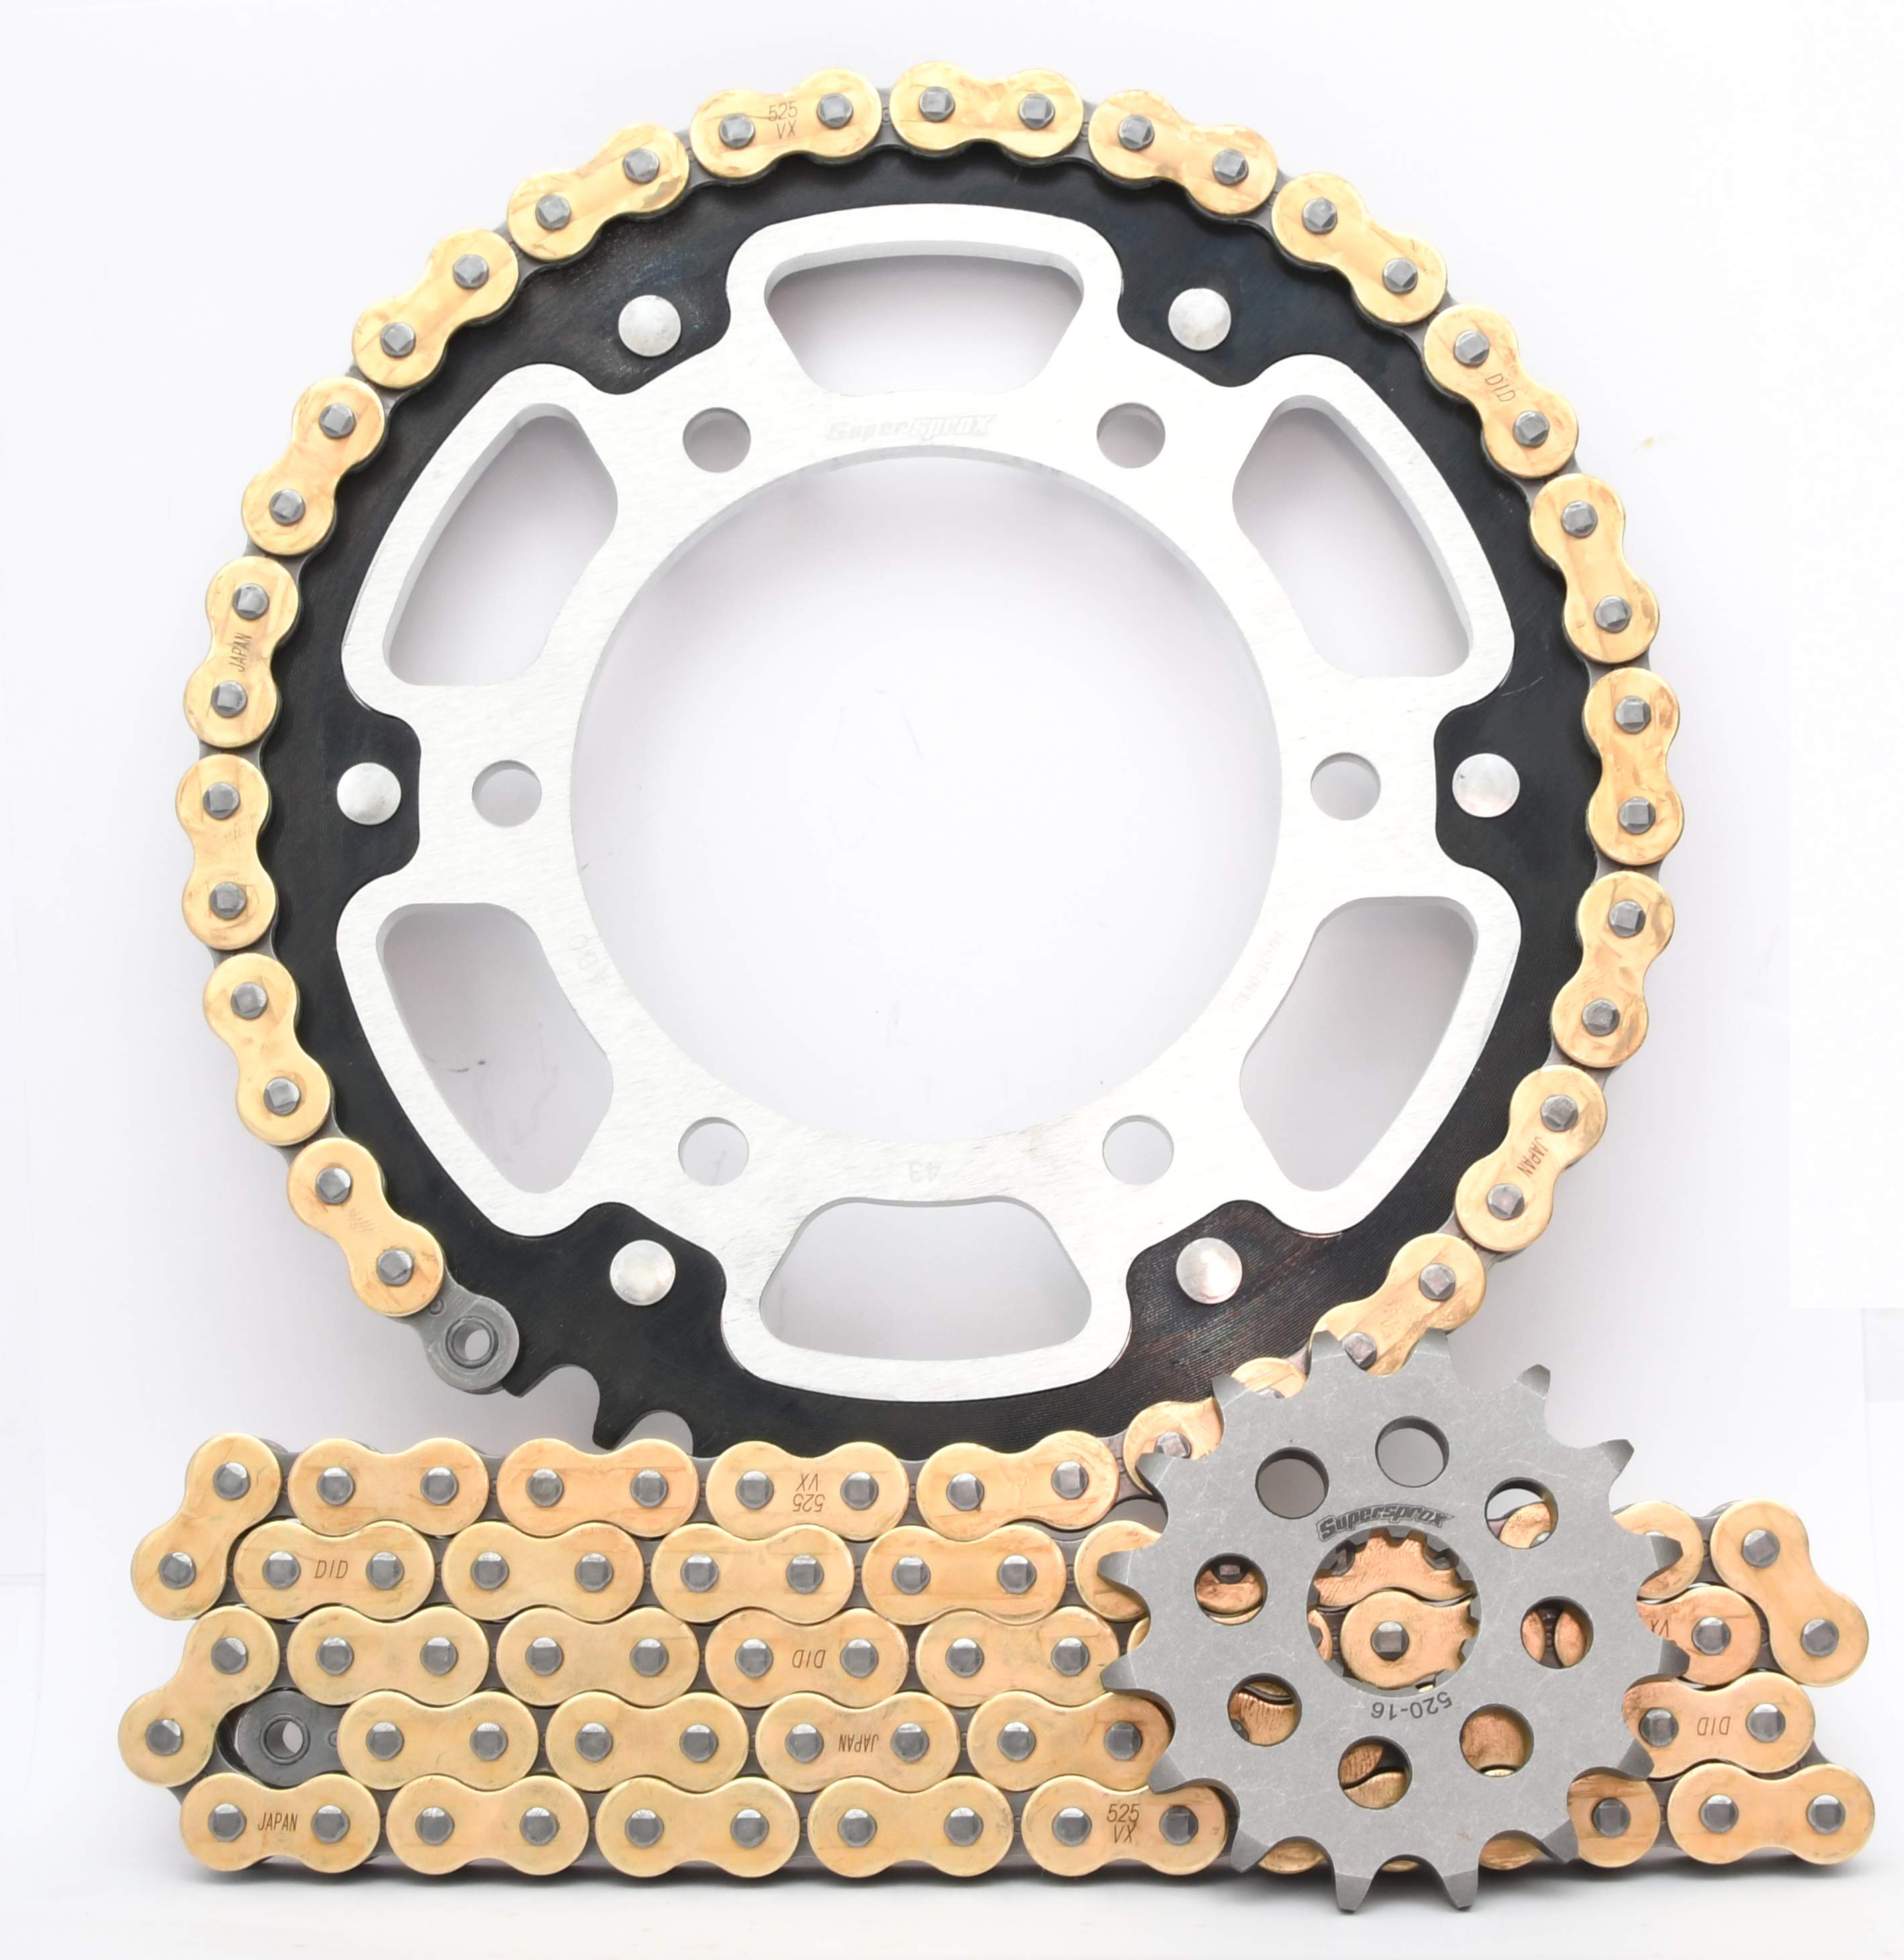 Supersprox Chain & Sprocket Kit for Yamaha MT-07 14> - Standard Gearing